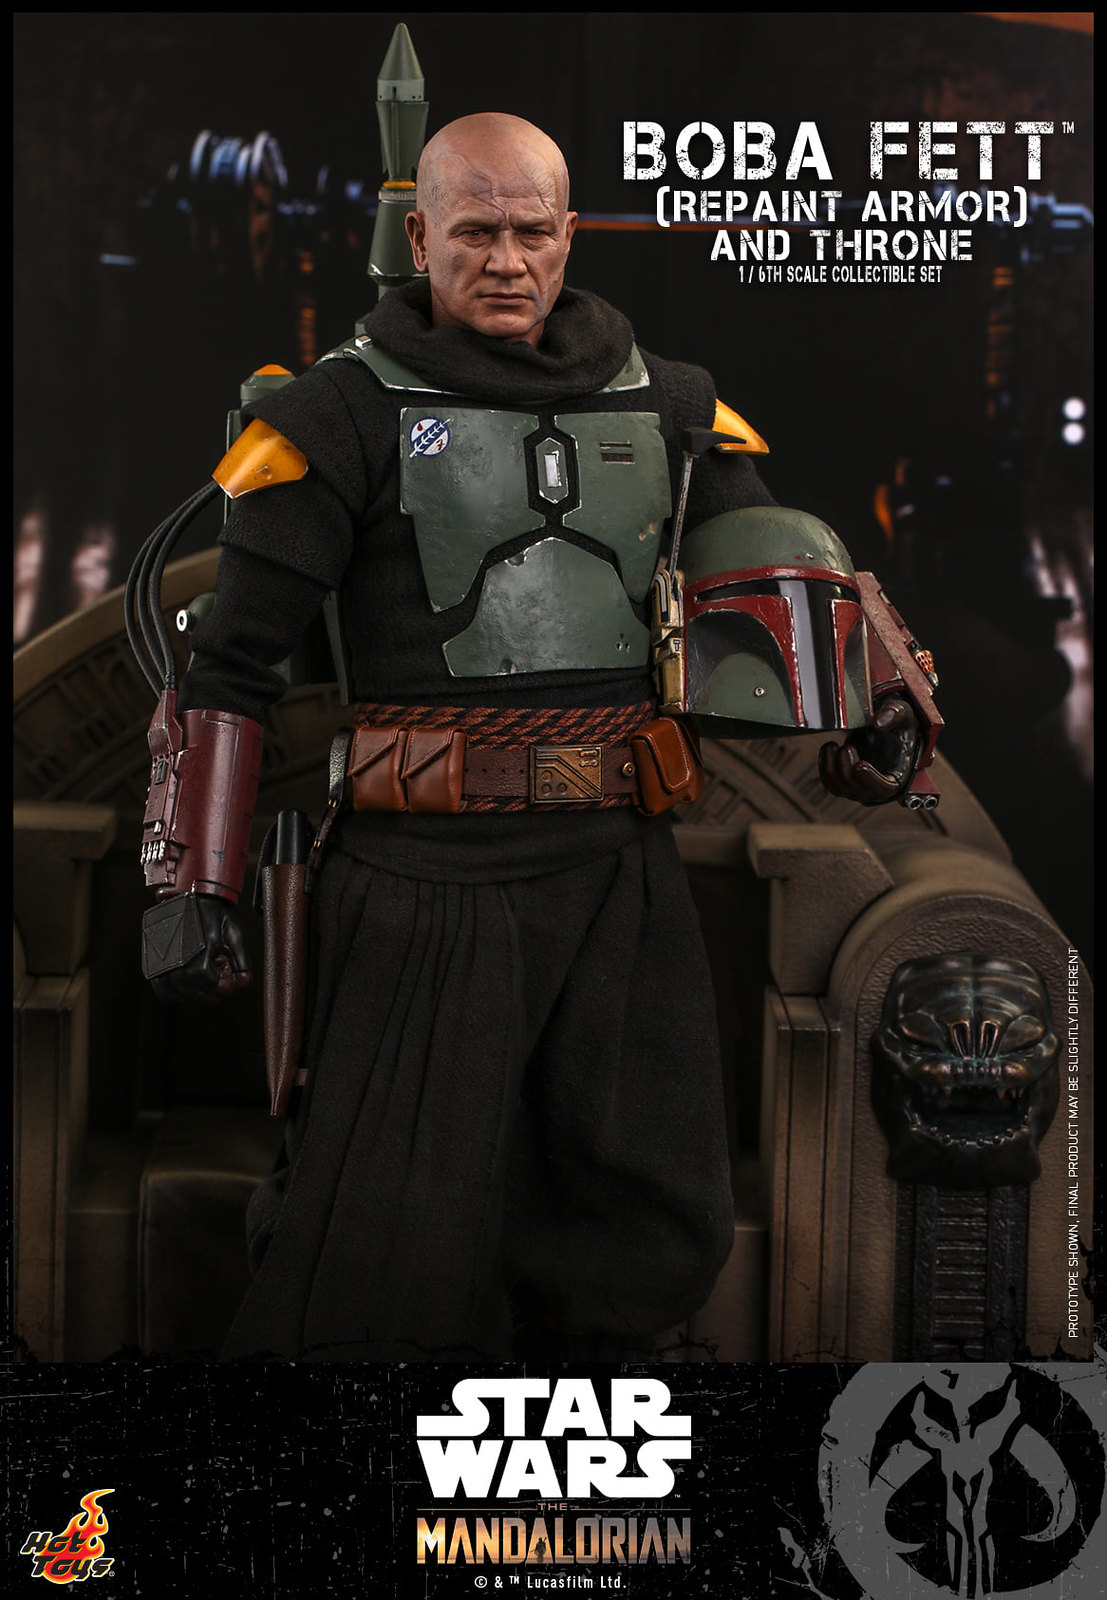 Star Wars: The Mandalorian™ - 1/6th scale Boba Fett™ (Repaint Armor) Collectible figure/ figure and Throne Collectible Set 51311496838_d743ea800d_h